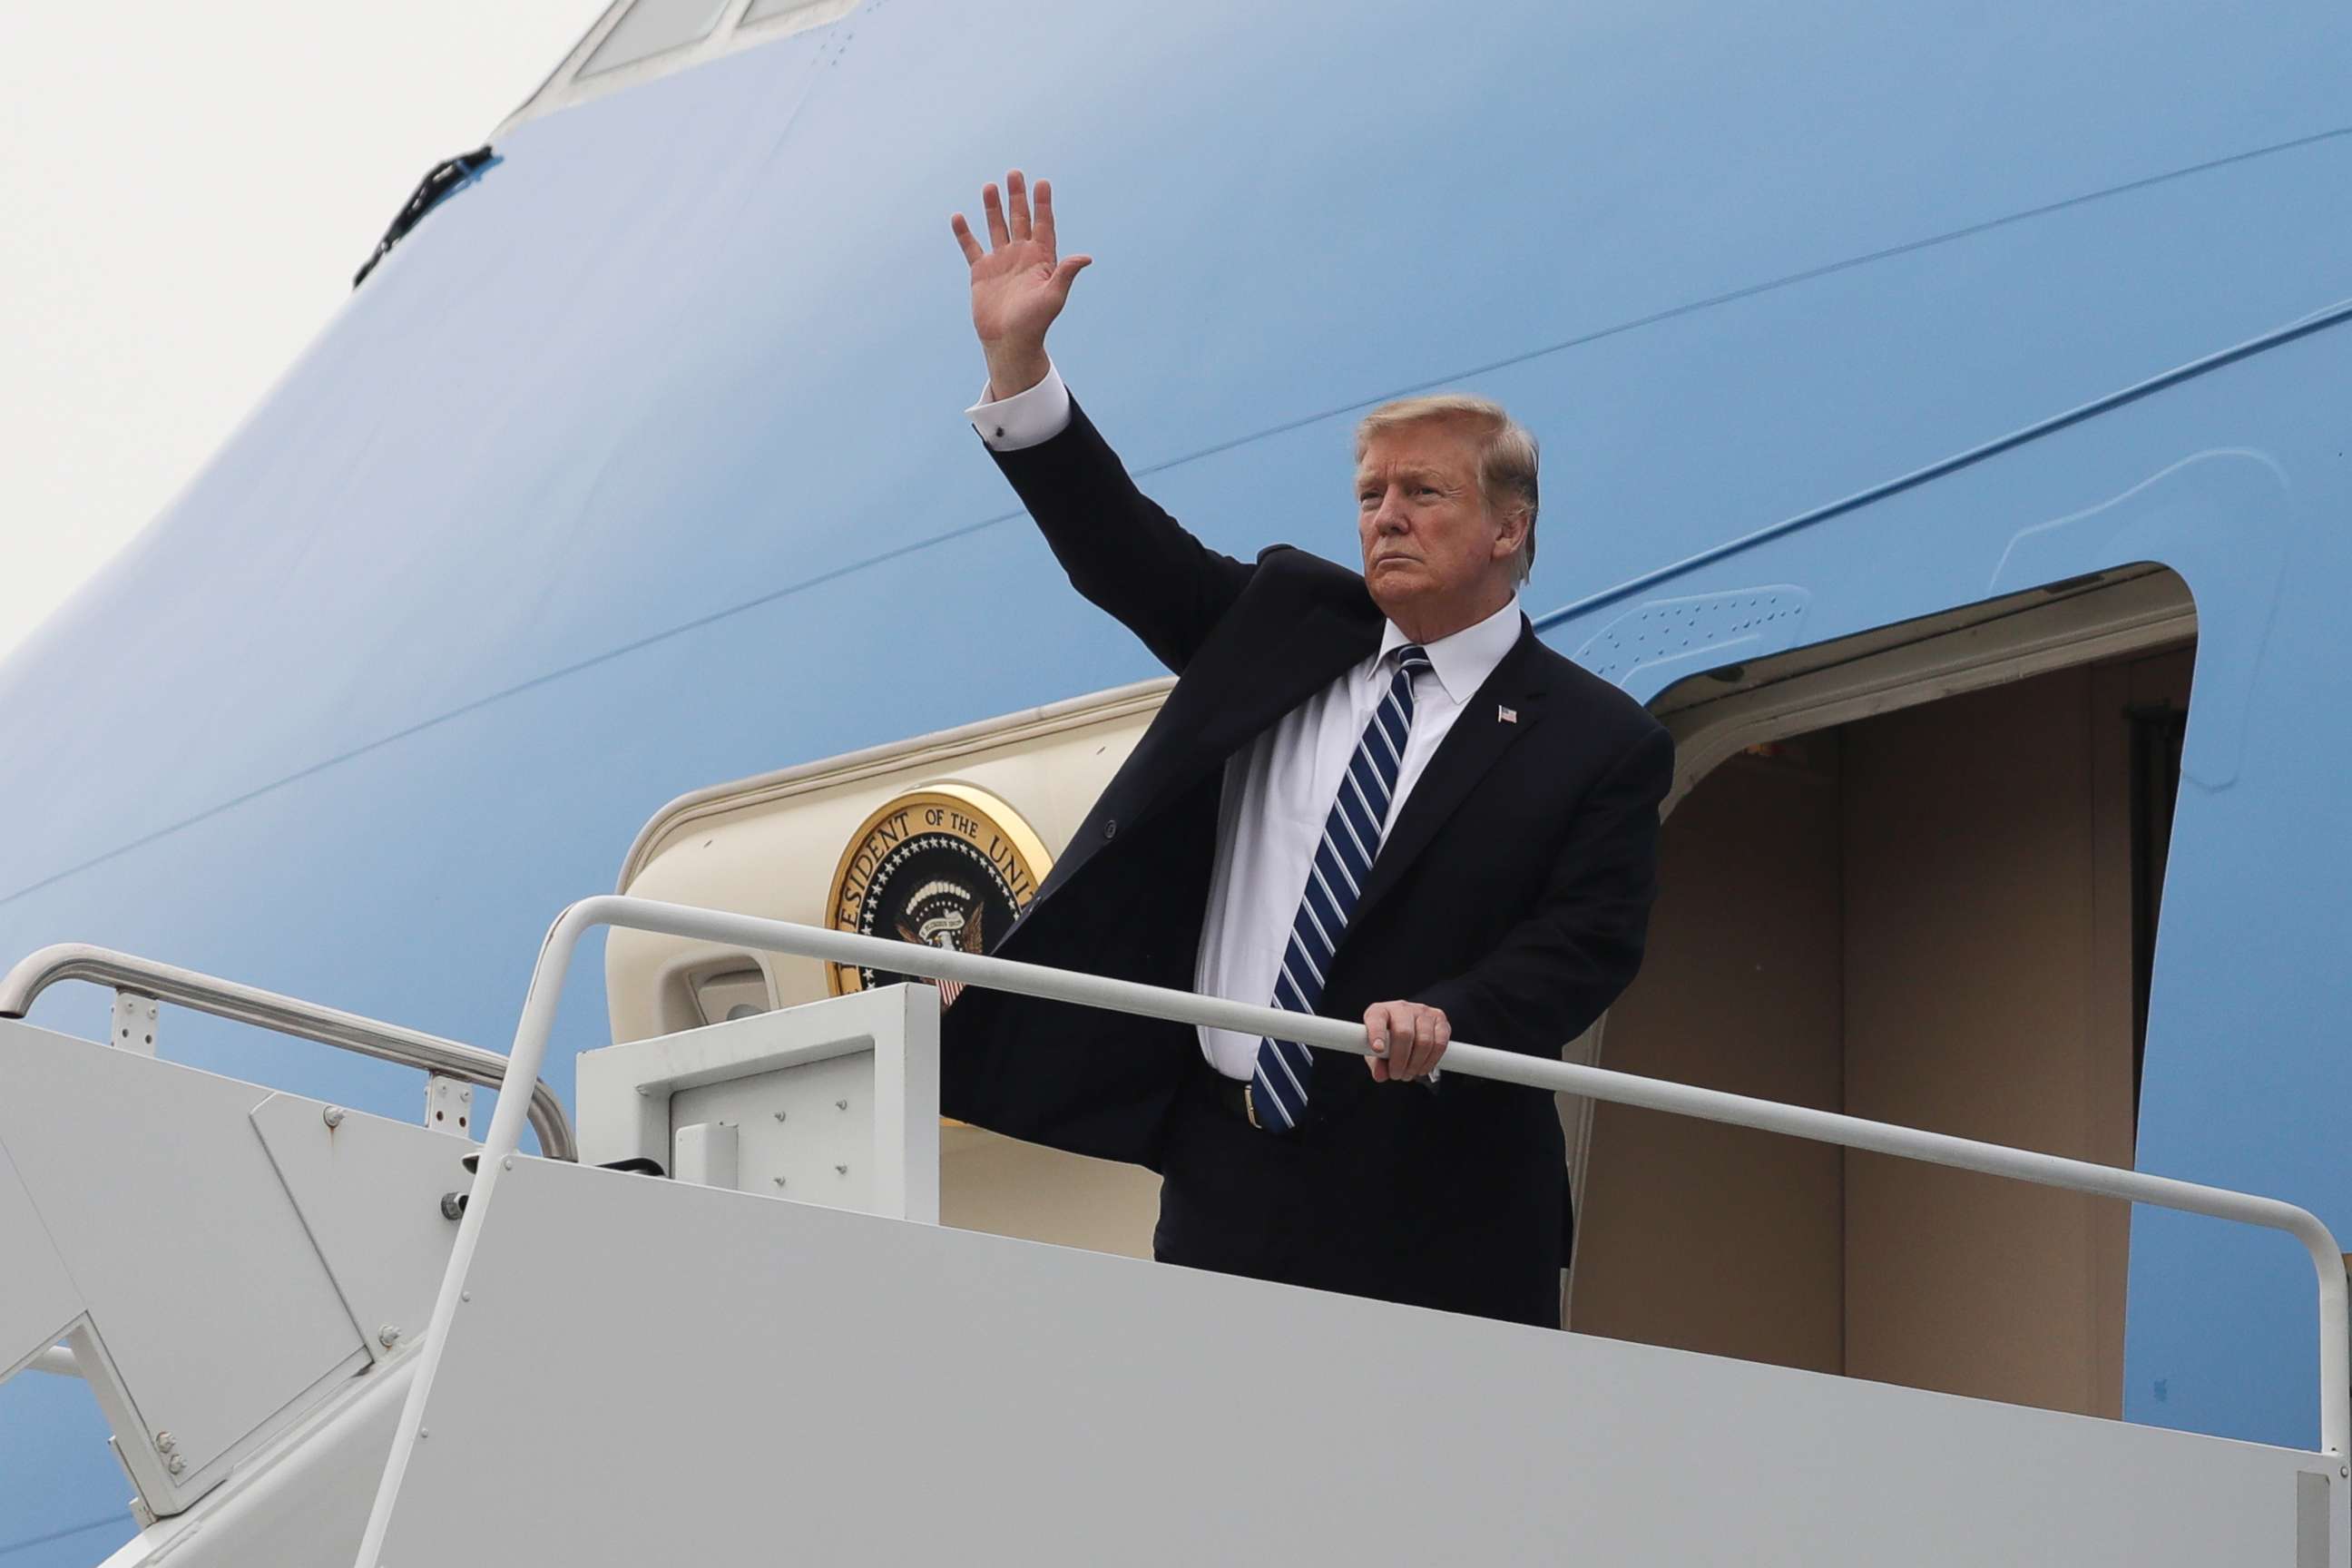 PHOTO: President Donald Trump waves as he boards Air Force One after a summit with North Korean leader Kim Jong Un, Feb. 28, 2019, in Hanoi, Vietnam.